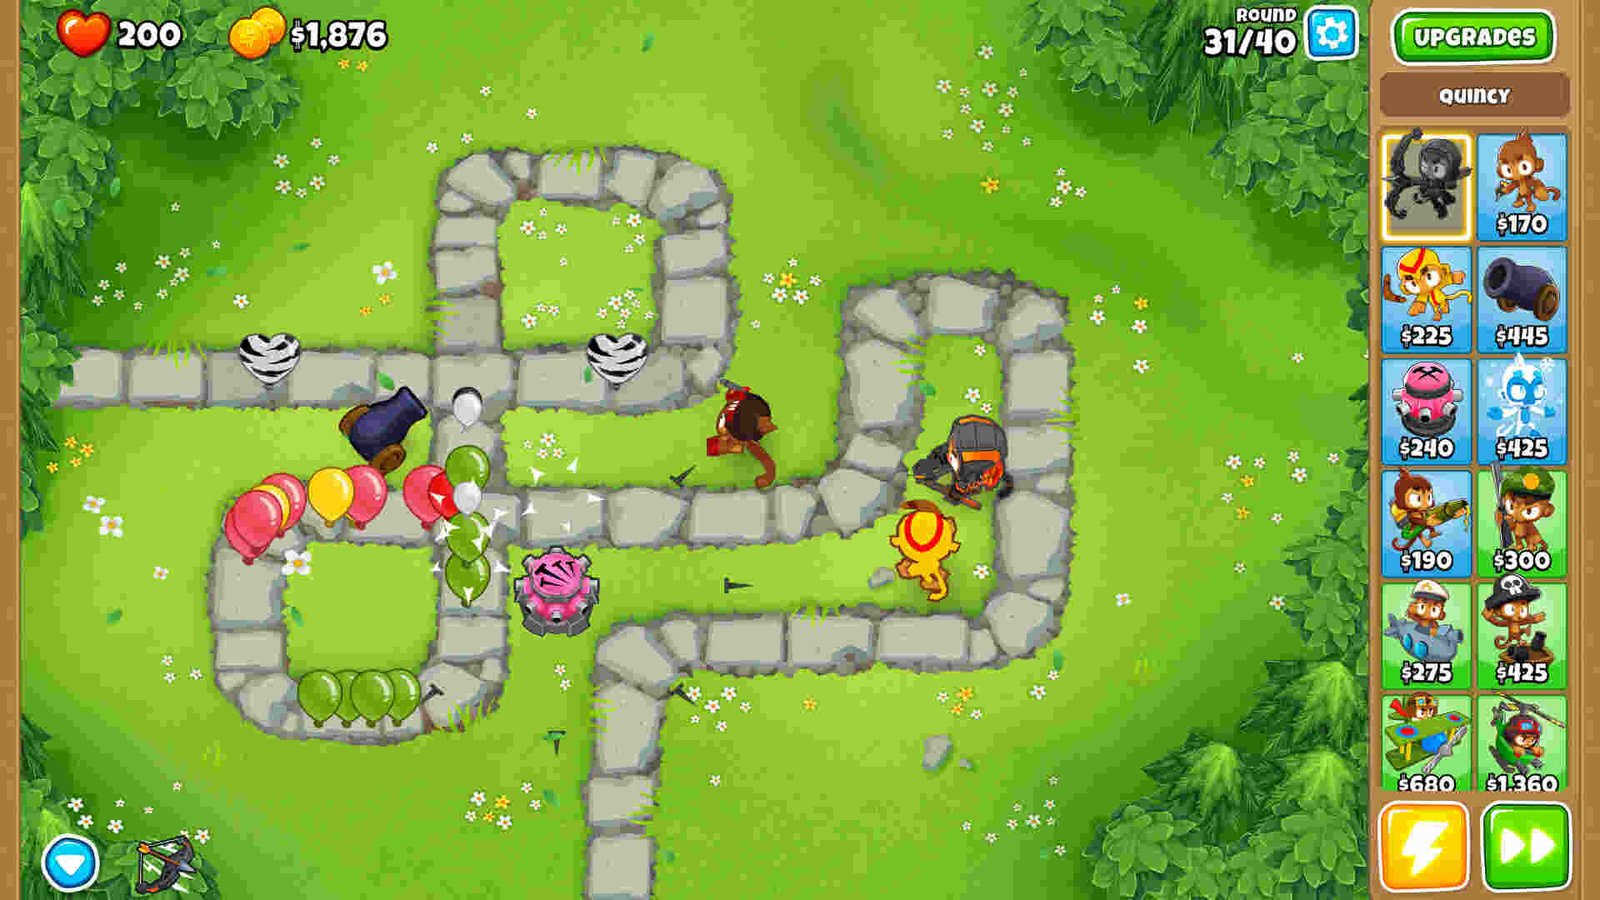 Bloons TD 6 lost progress issue on Steam: Is it fixable?